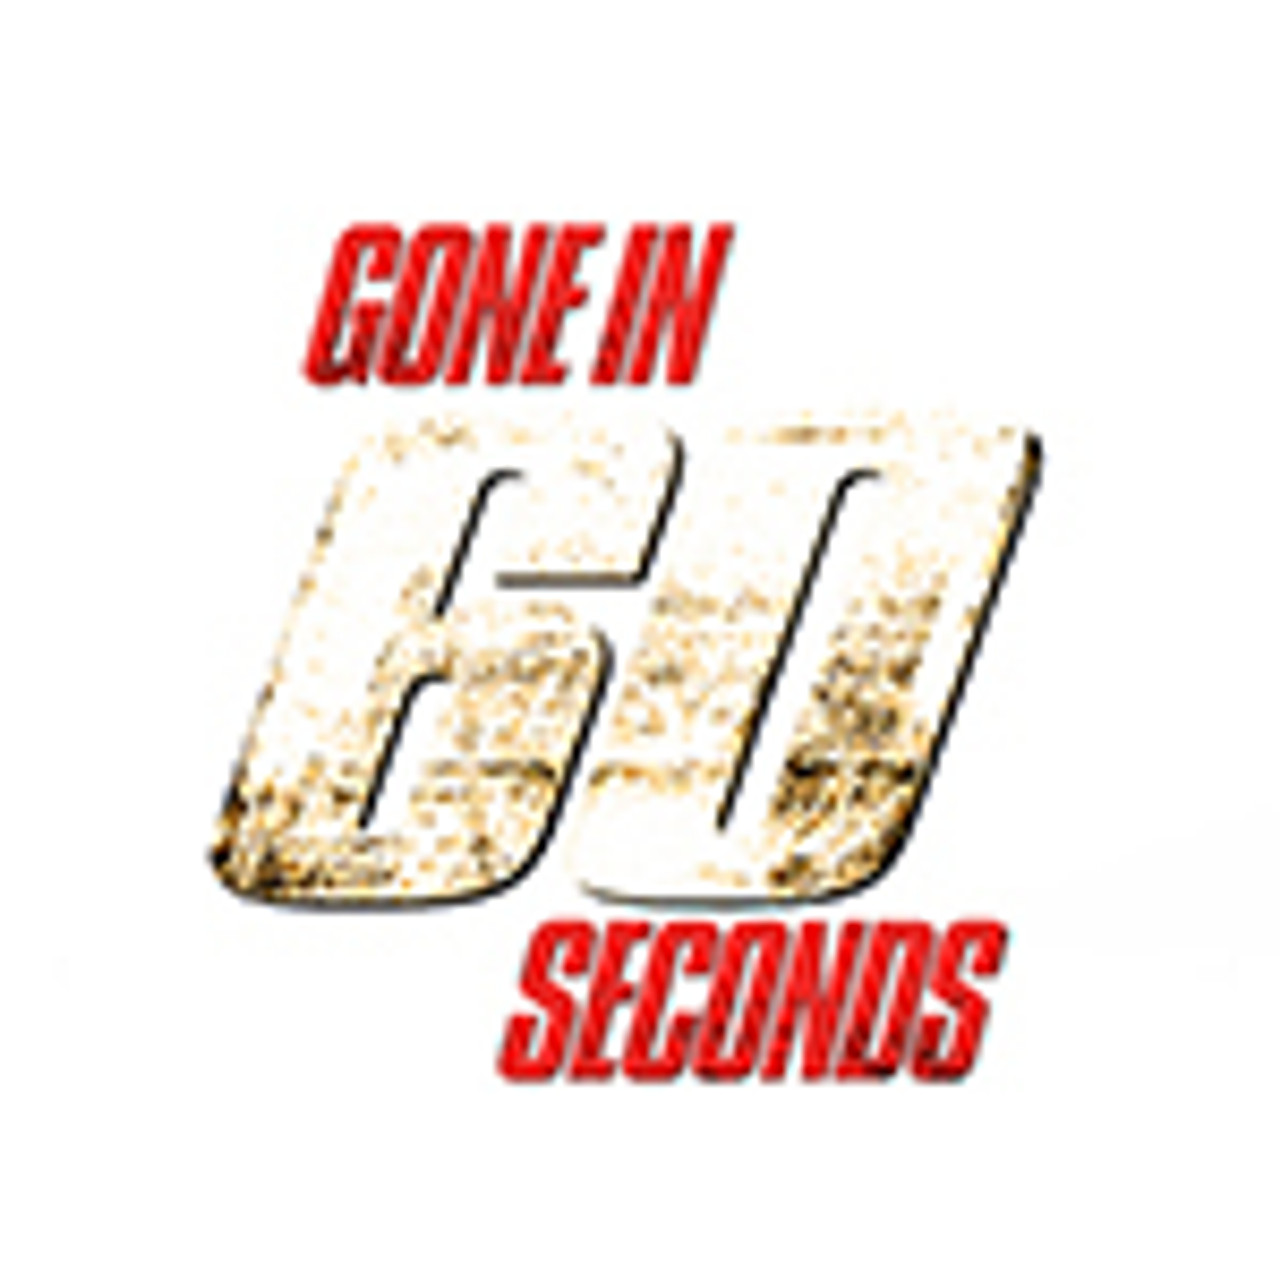 Gone in 60 Seconds